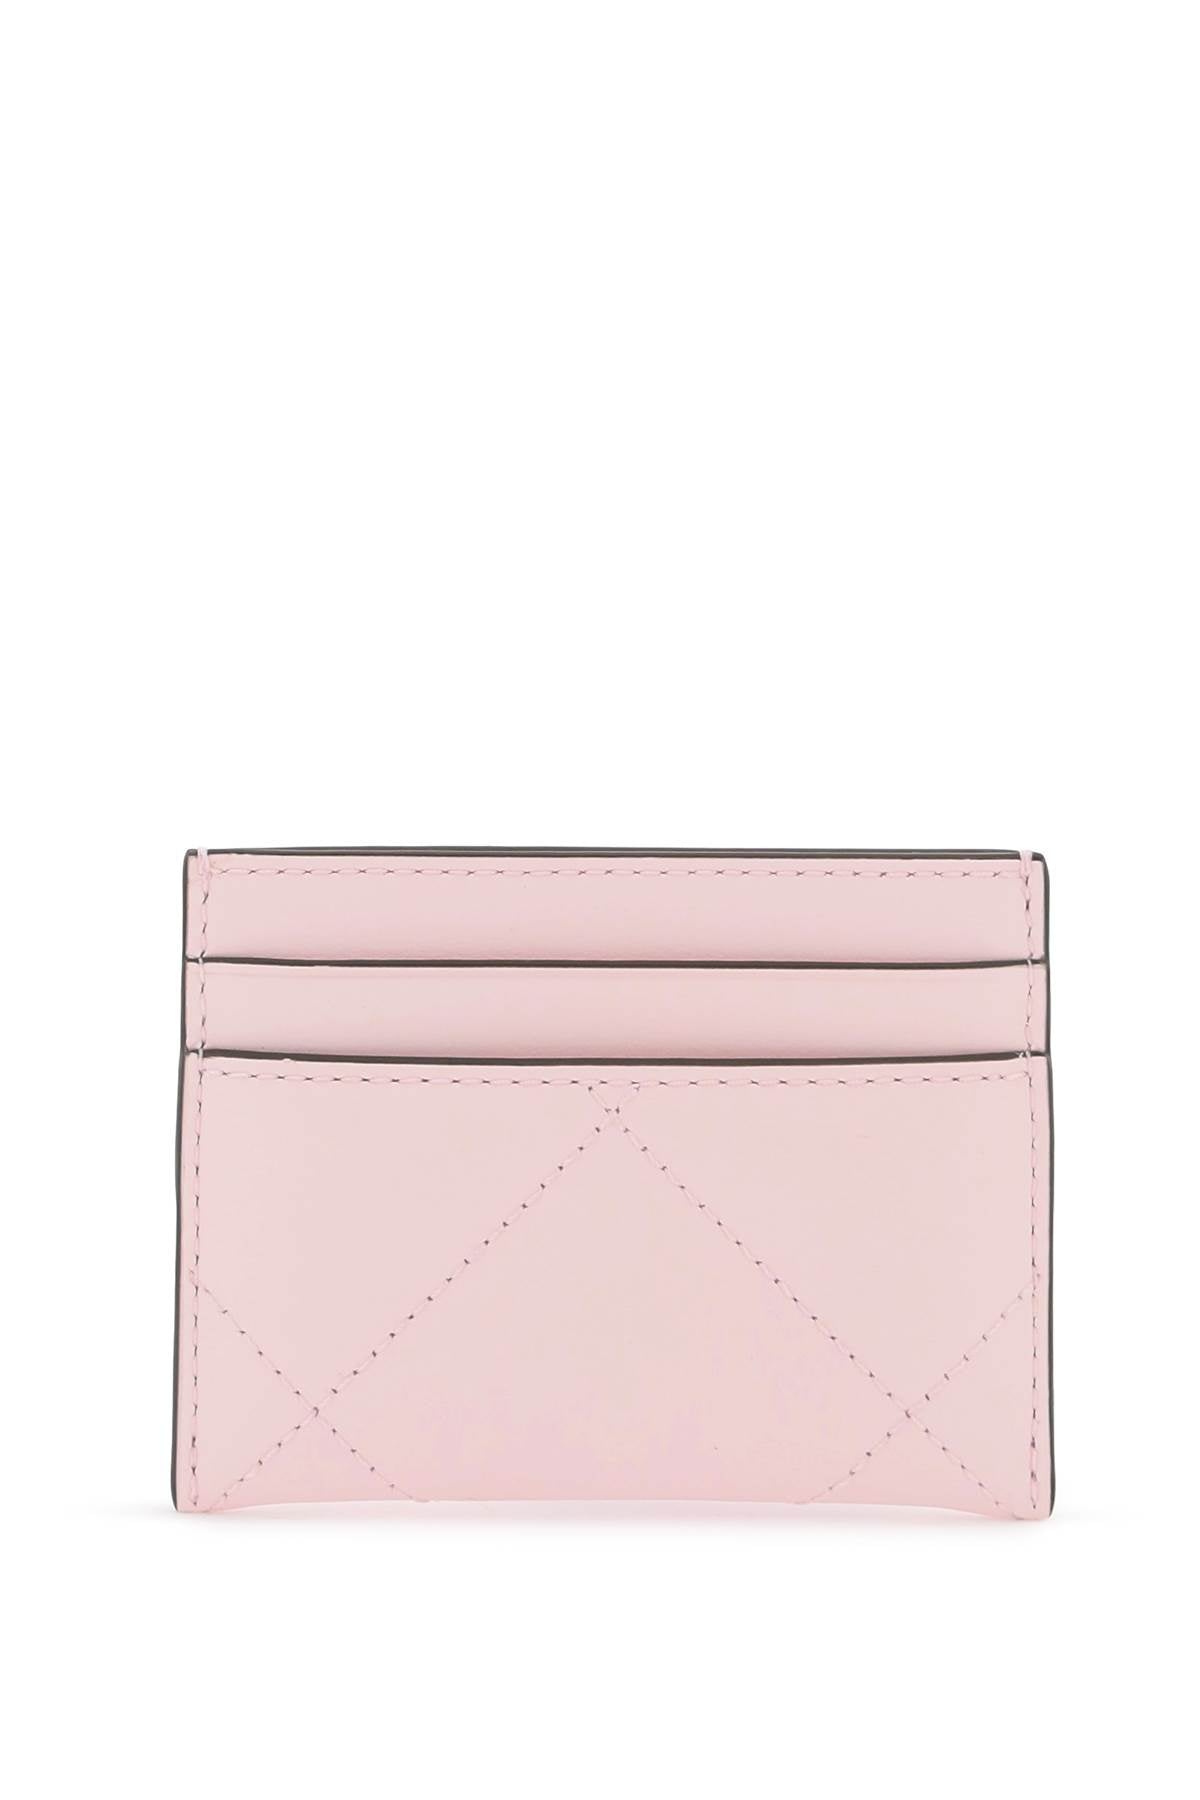 Tory burch kira card holder with trapezoid-2